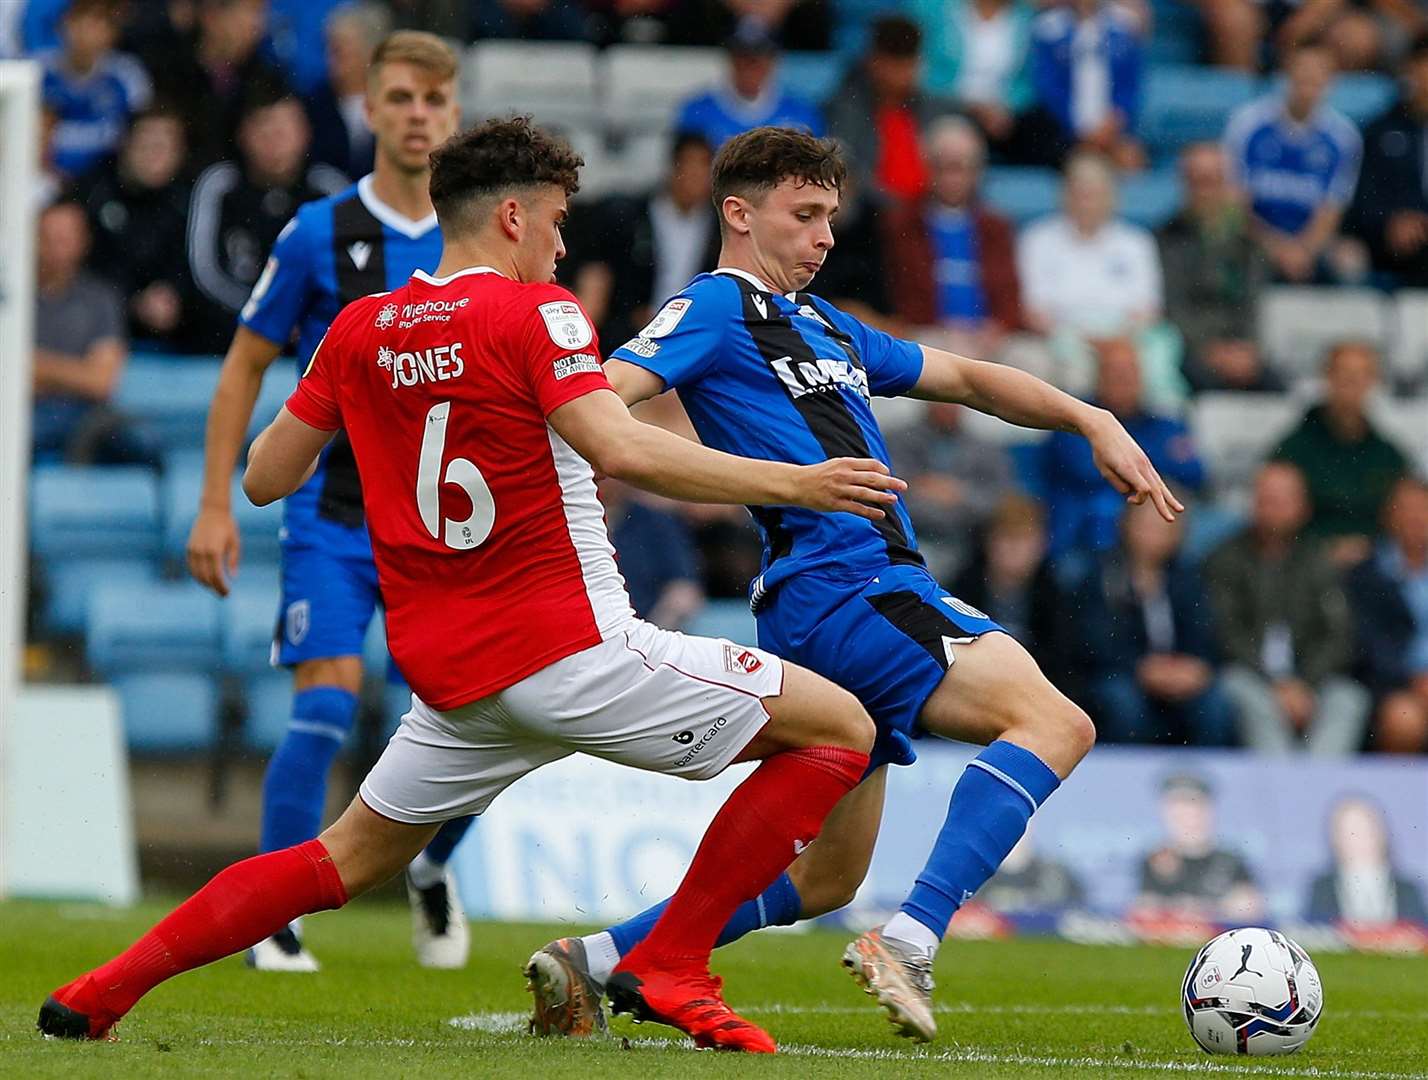 New loan signing Dan Adshead in action for Gills against Morecambe. Picture: Andy Jones (50452123)